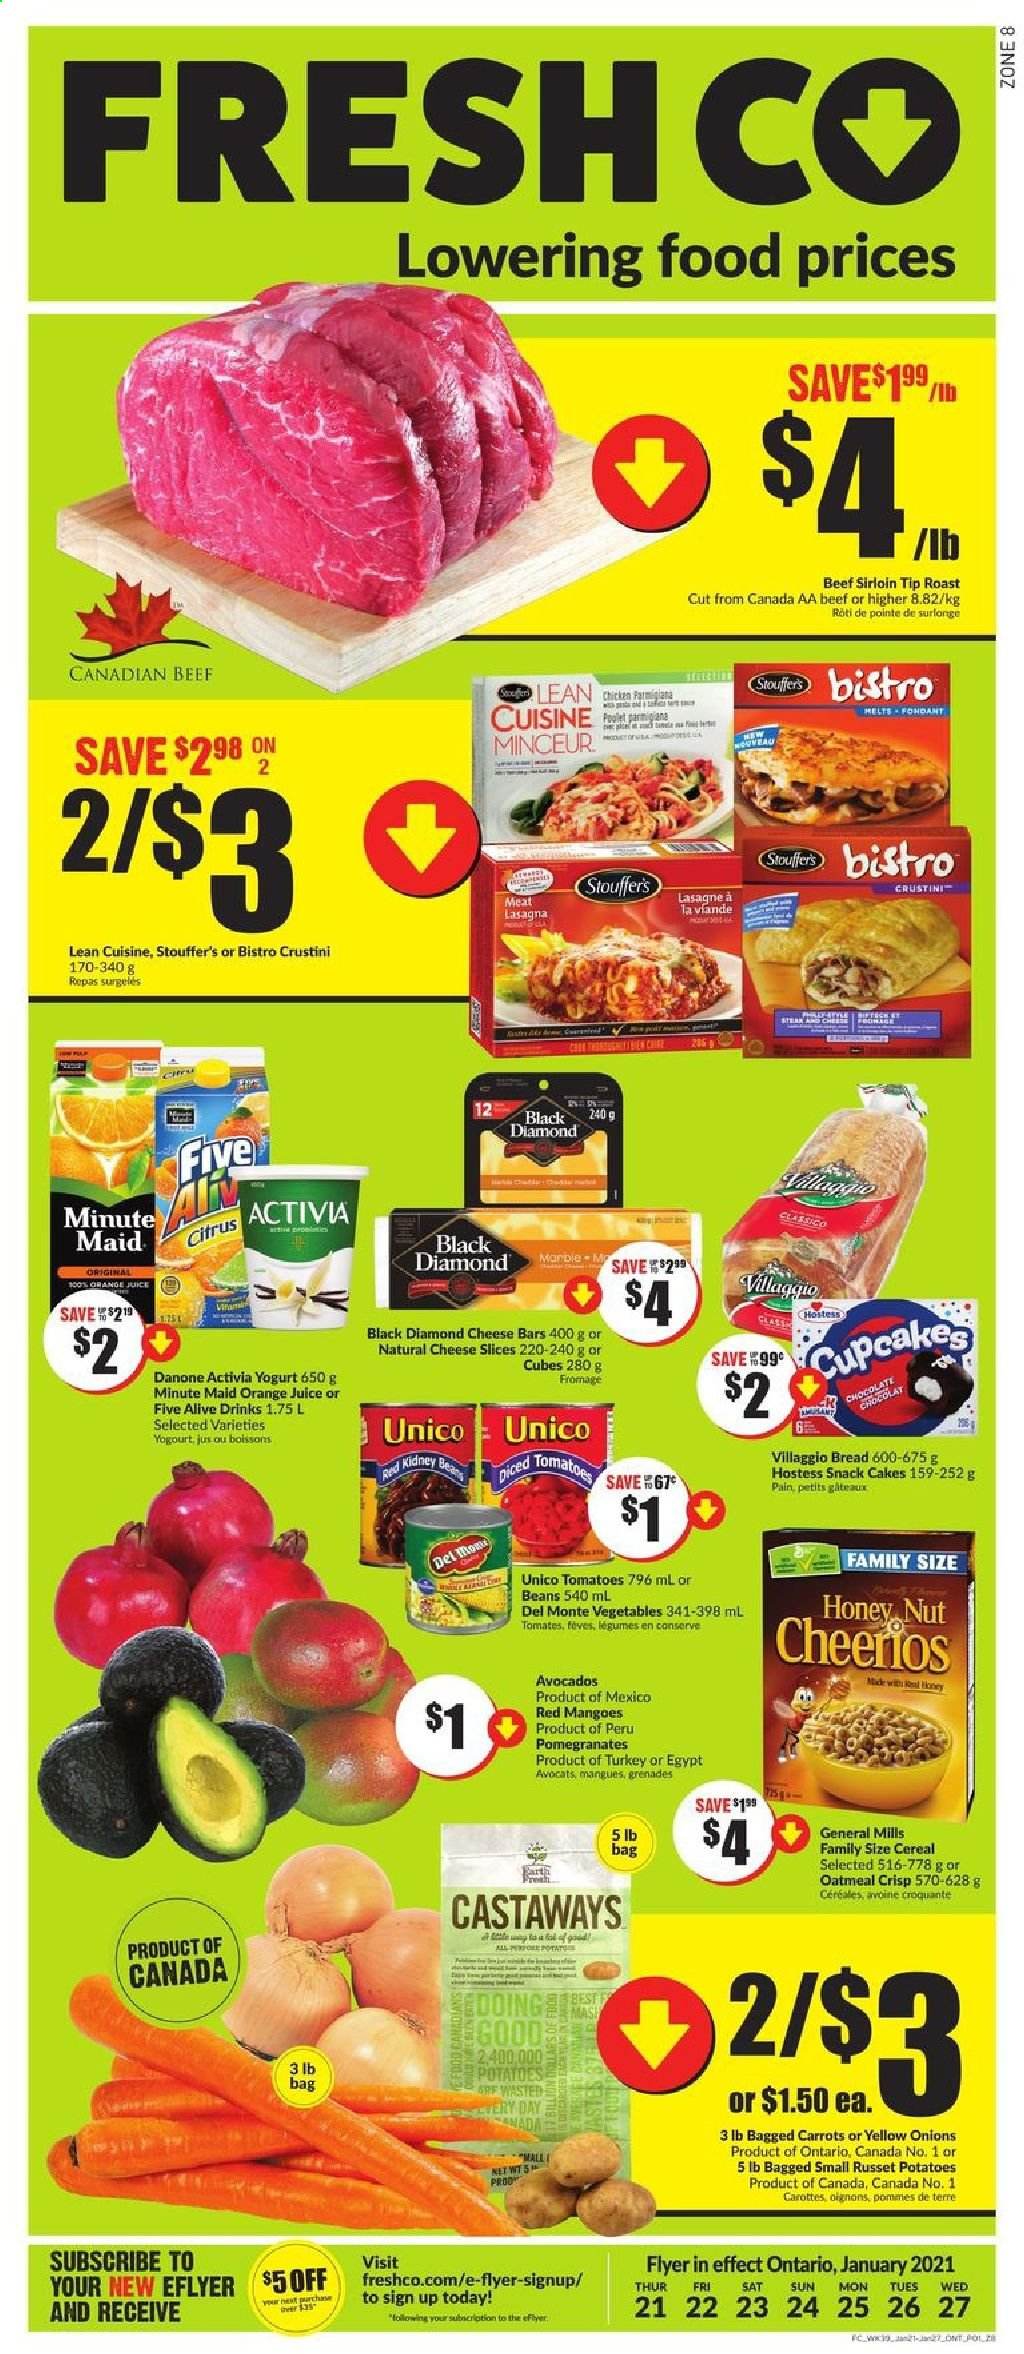 thumbnail - FreshCo. Flyer - January 21, 2021 - January 27, 2021 - Sales products - bread, cake, beans, carrots, russet potatoes, tomatoes, potatoes, onion, avocado, mango, pomegranate, lasagna meal, Lean Cuisine, sliced cheese, cheese, yoghurt, Activia, Stouffer's, parmigiana, chocolate, snack, oatmeal, cereals, Classico, honey, orange juice, juice, fruit punch, beef meat, beef sirloin, Danone. Page 1.